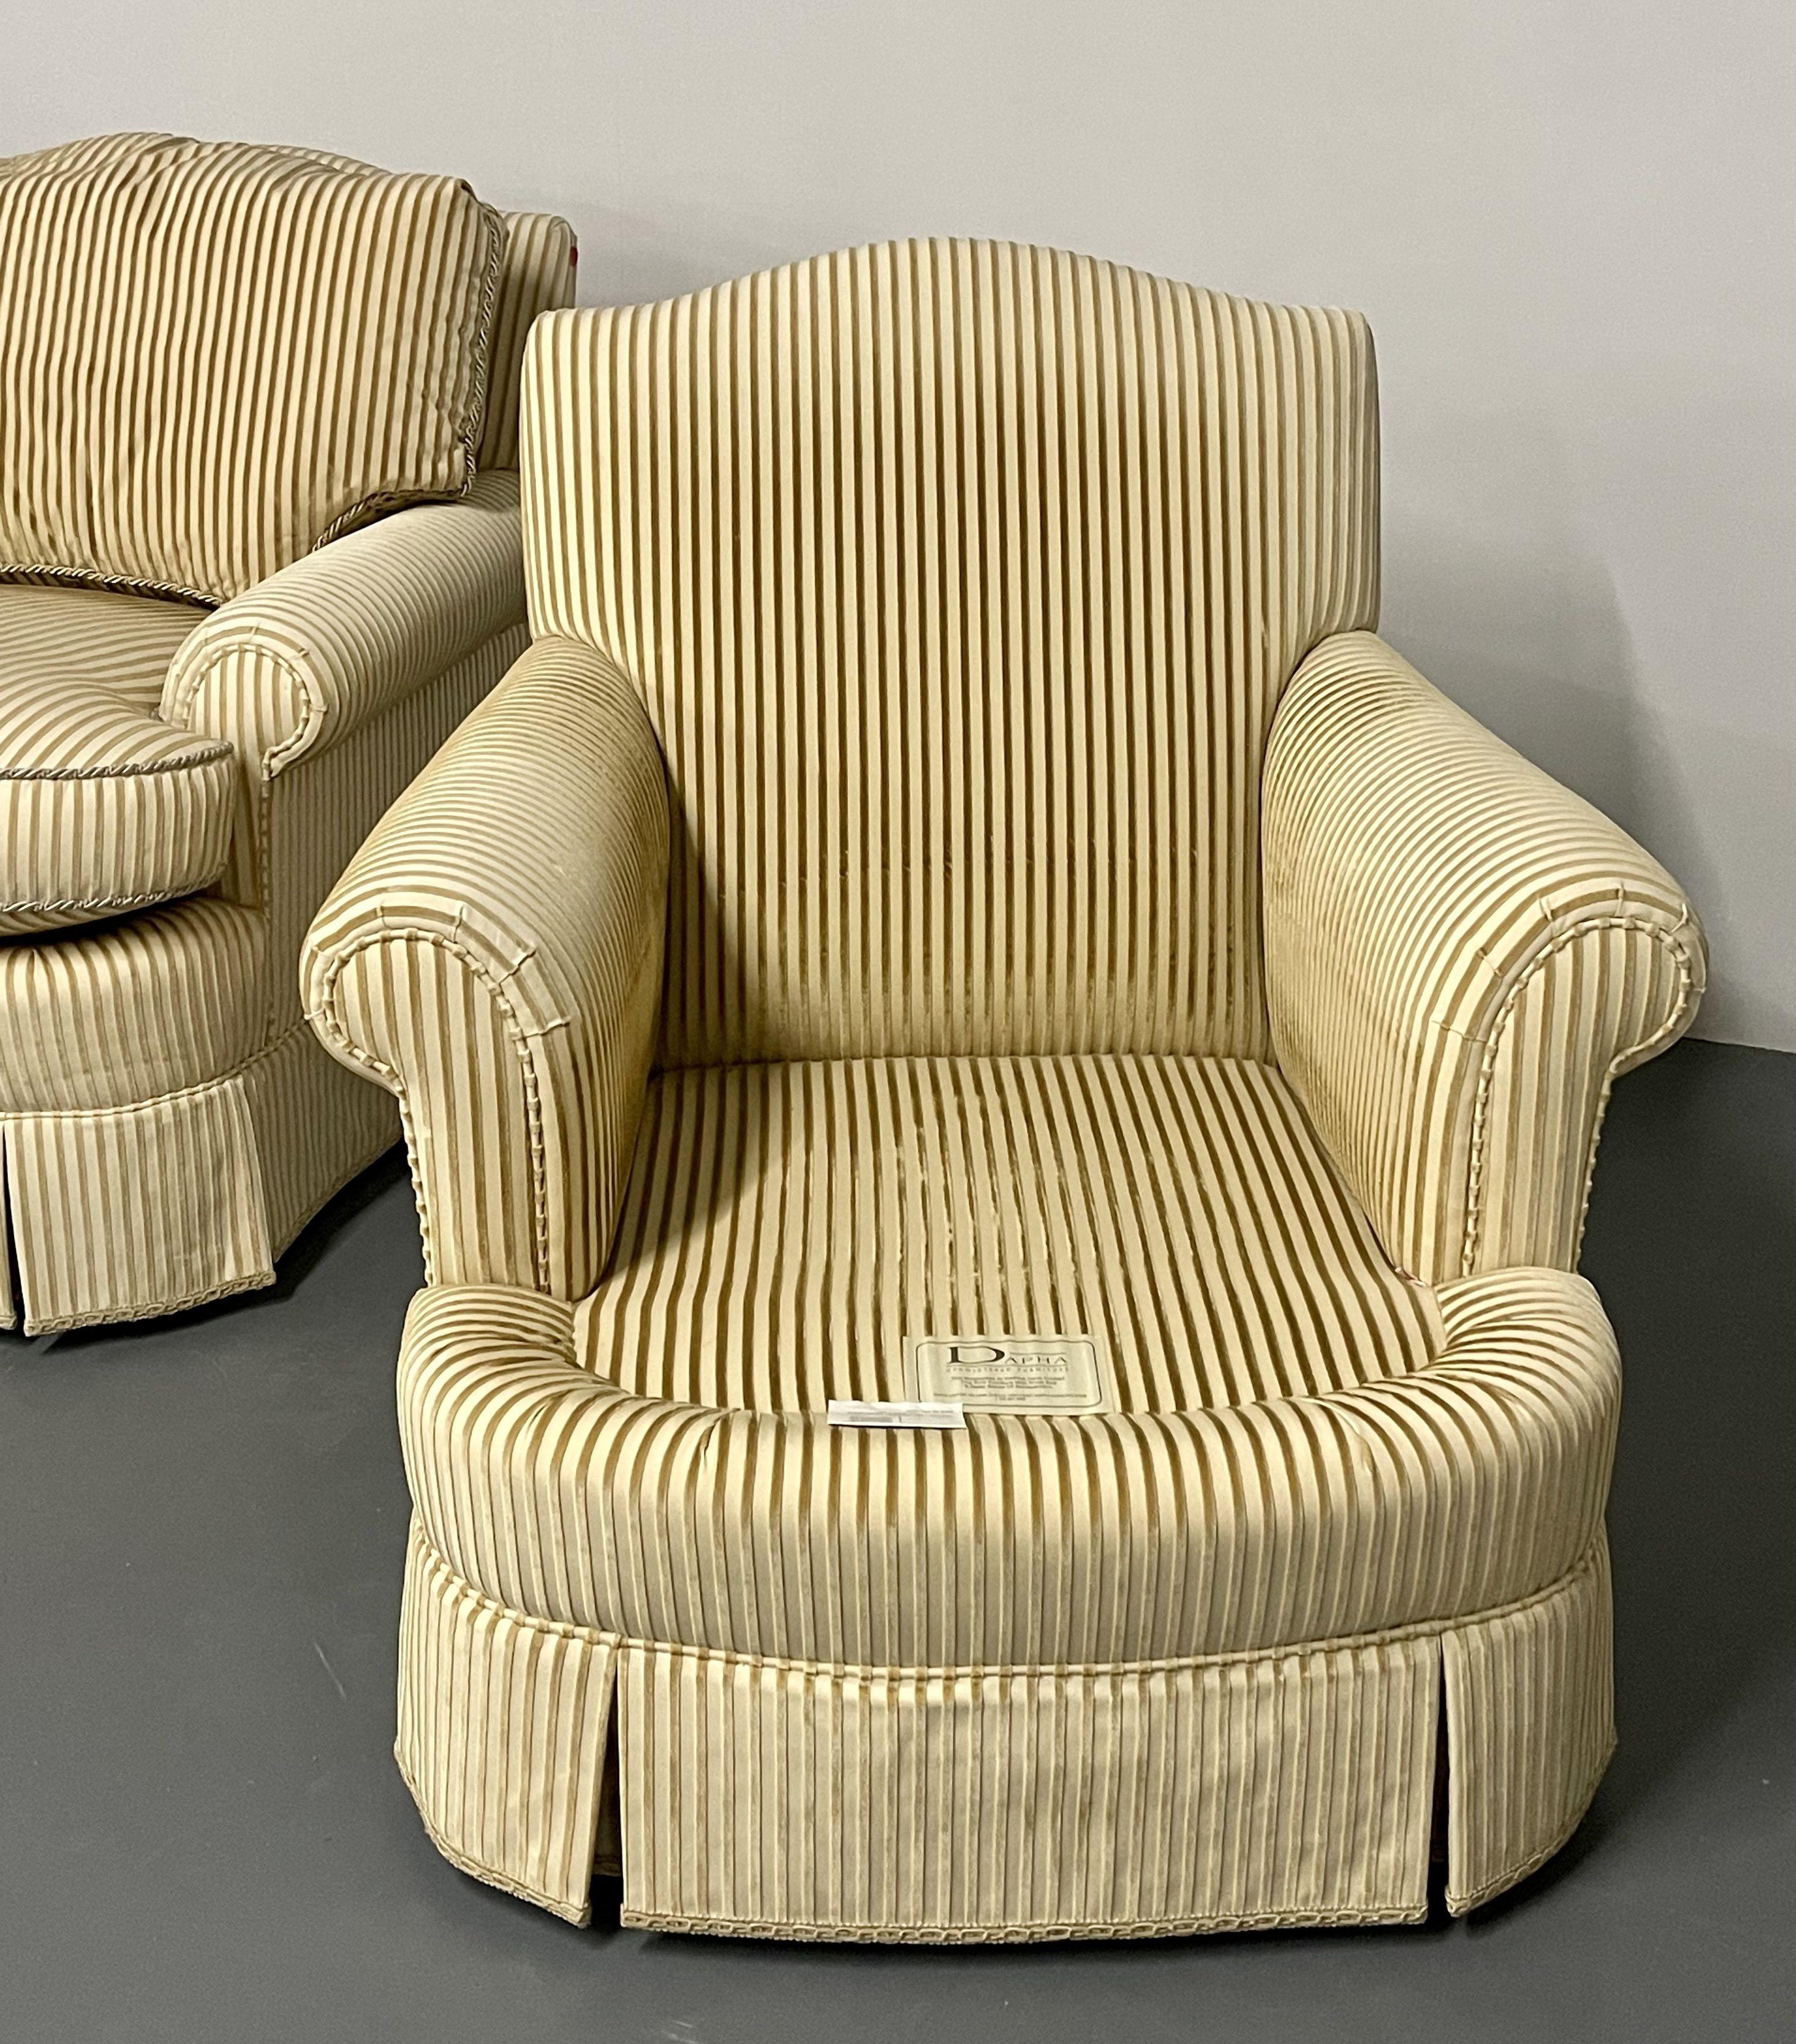 Pair of Lounge, Club or Overstuffed Chairs, Dapha, Finely Upholstered 1